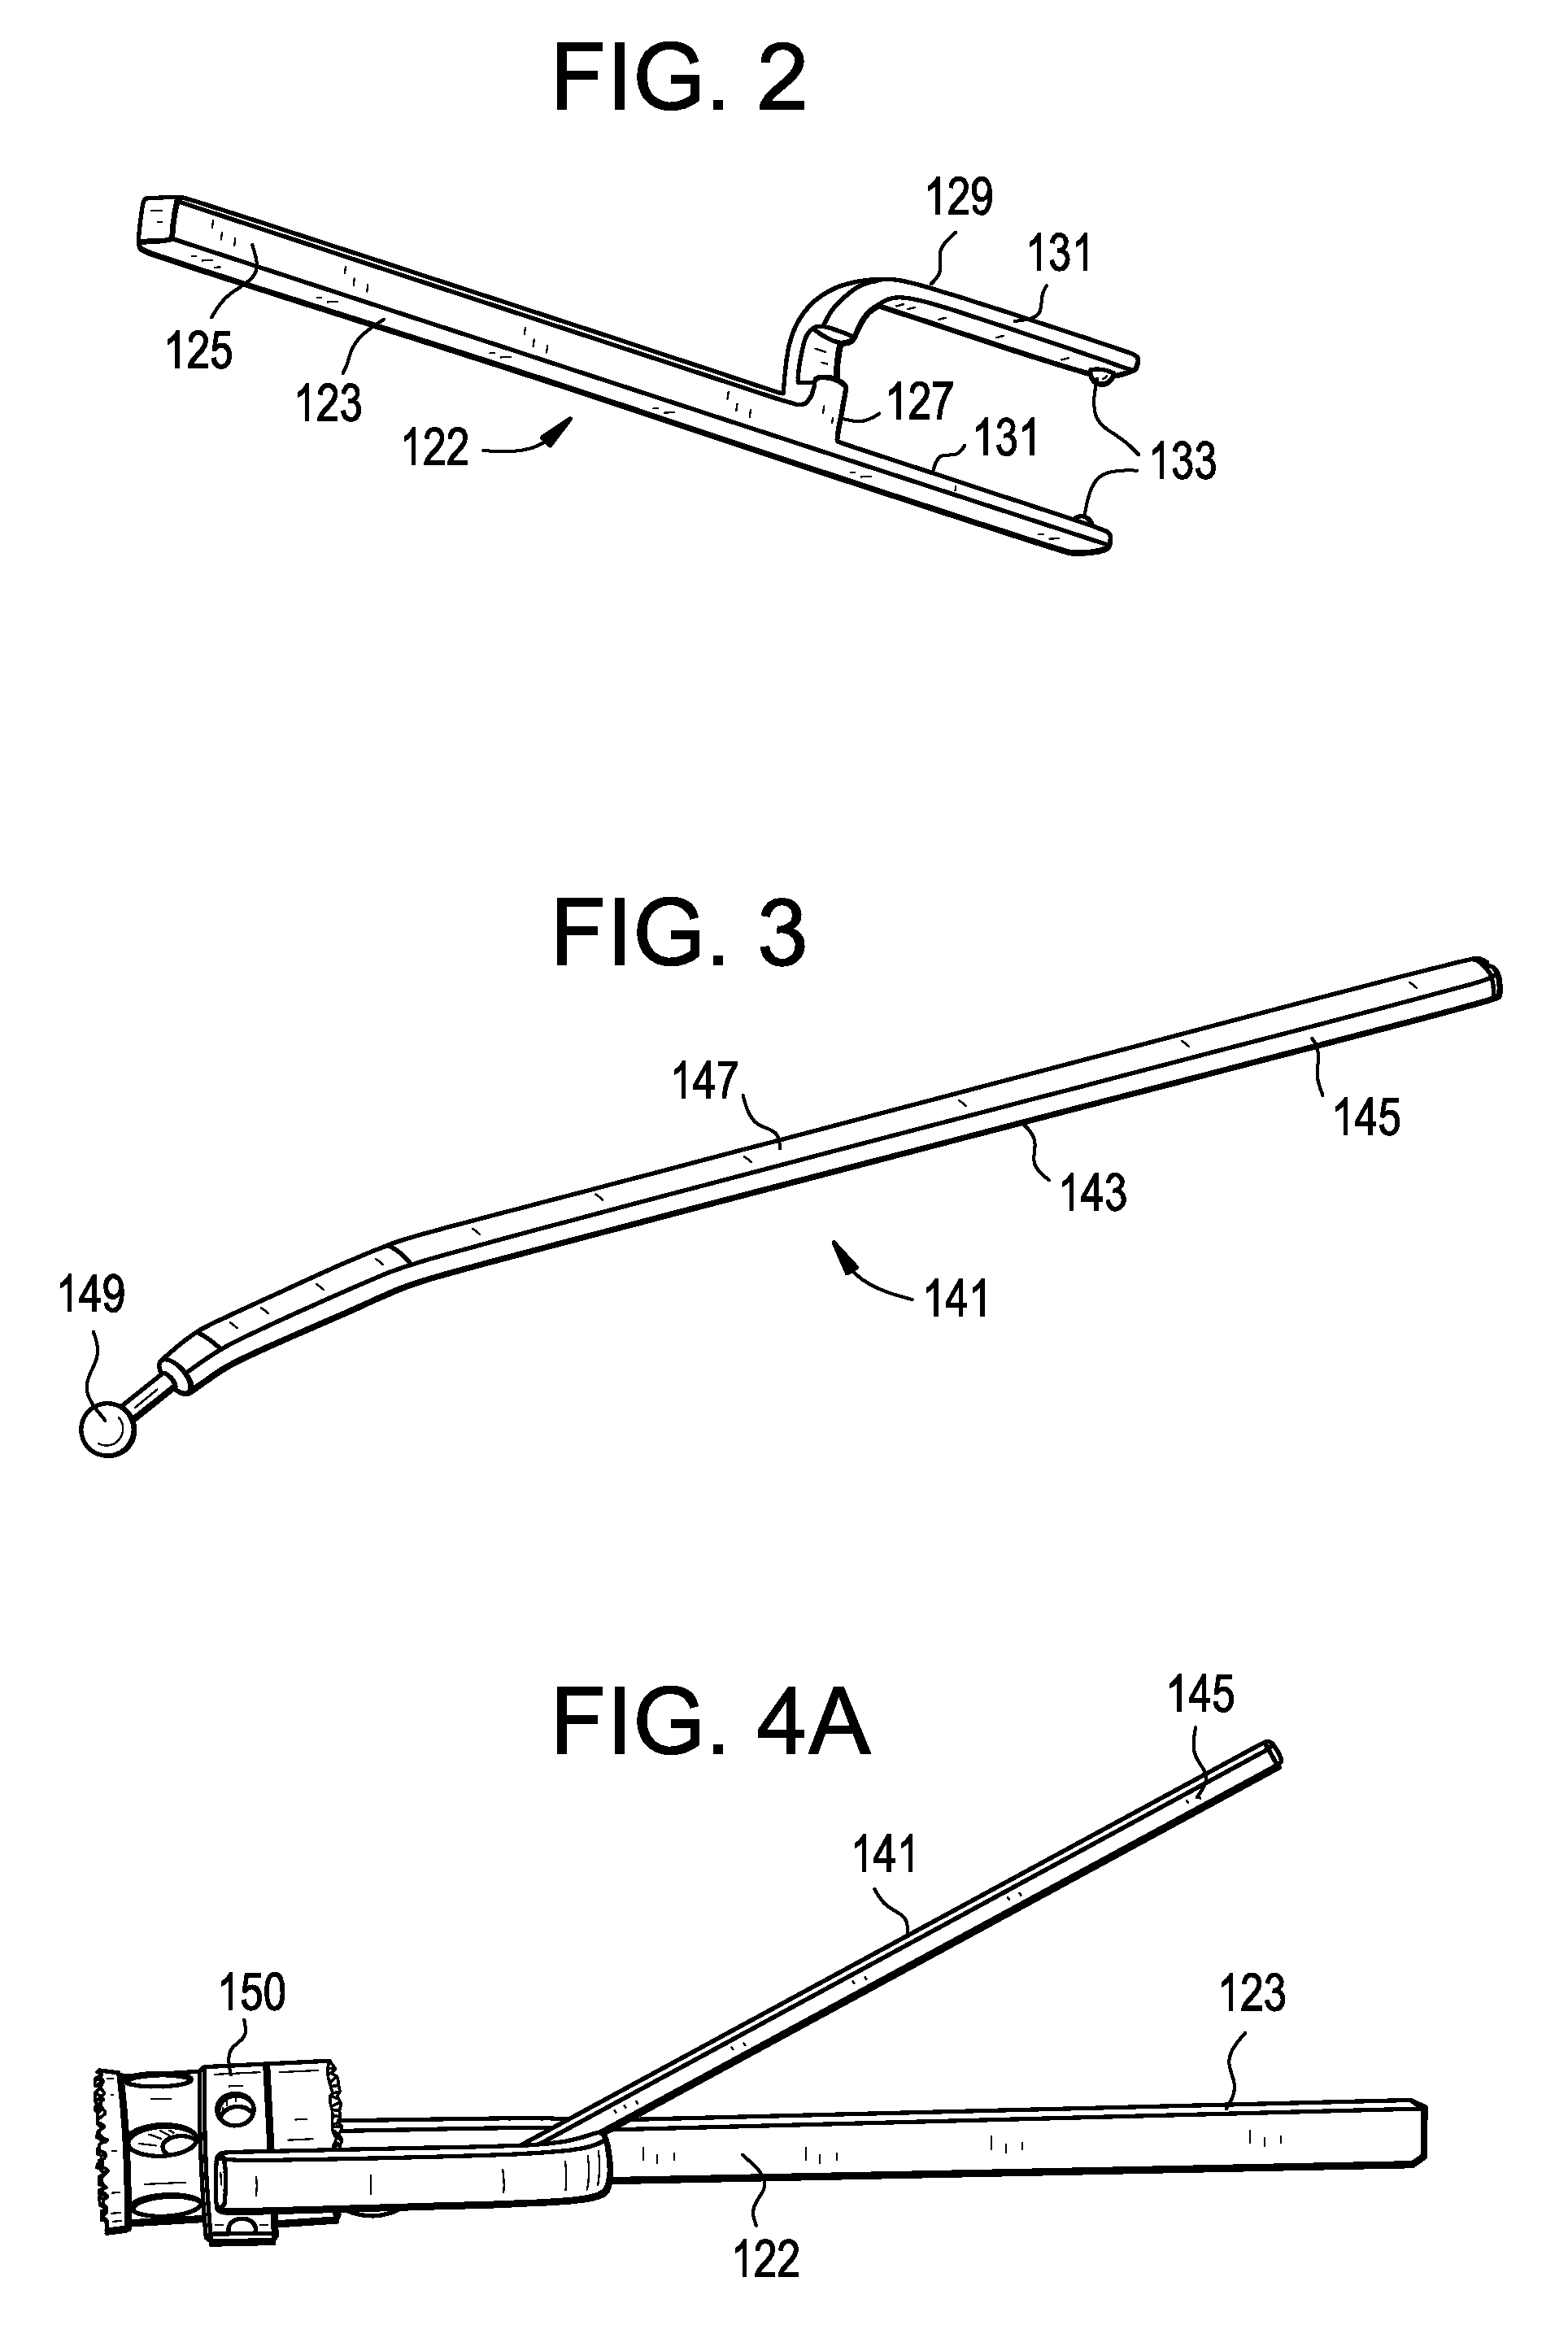 Minimally invasive corpectomy cage and instrument